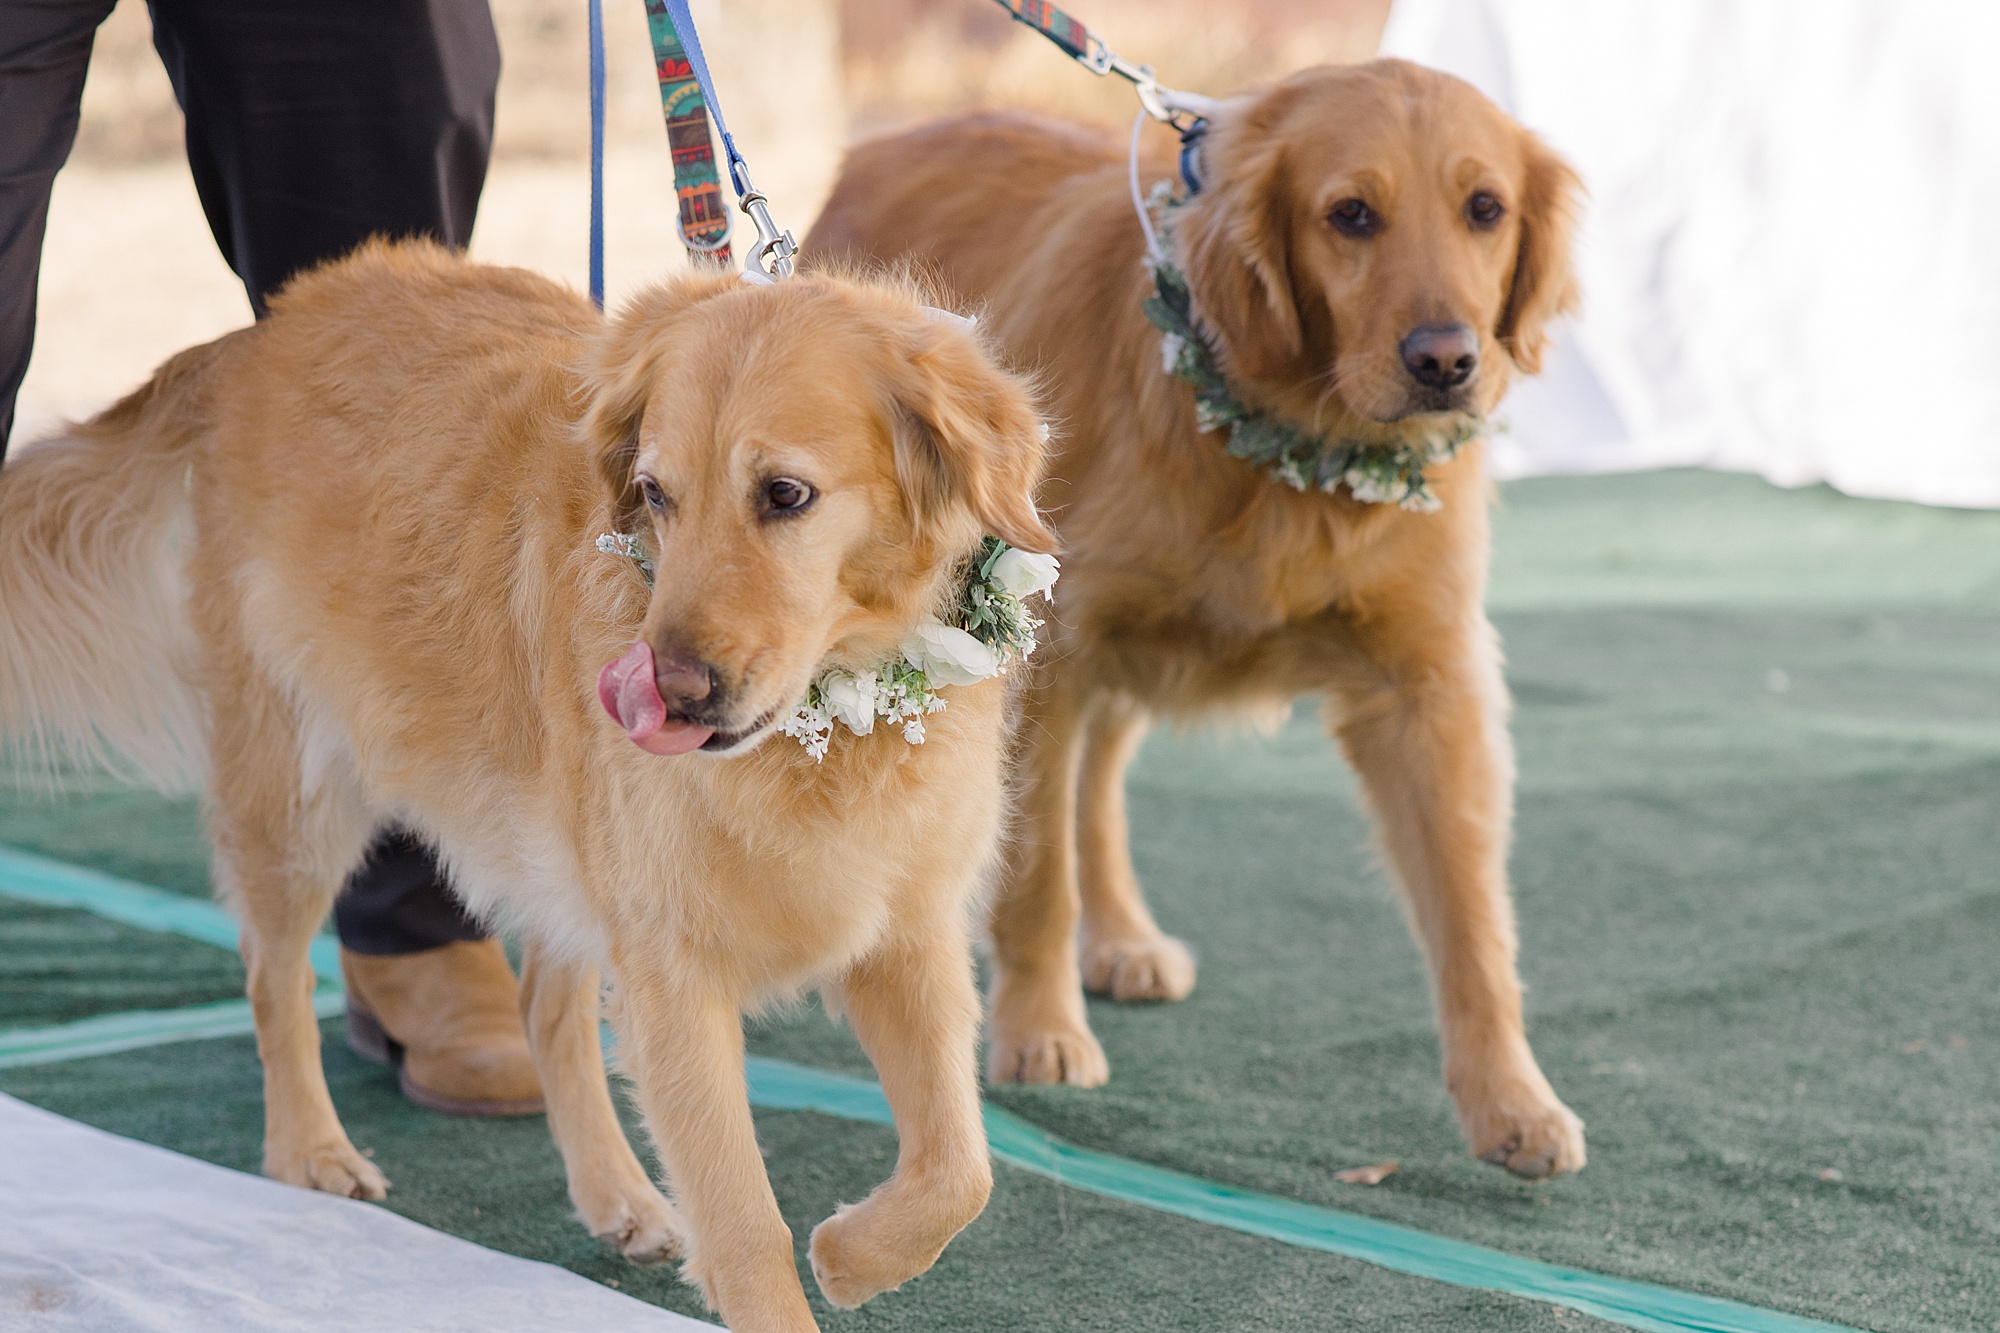 dogs walk down the aisle for wedding ceremony on private farm in New Mexico